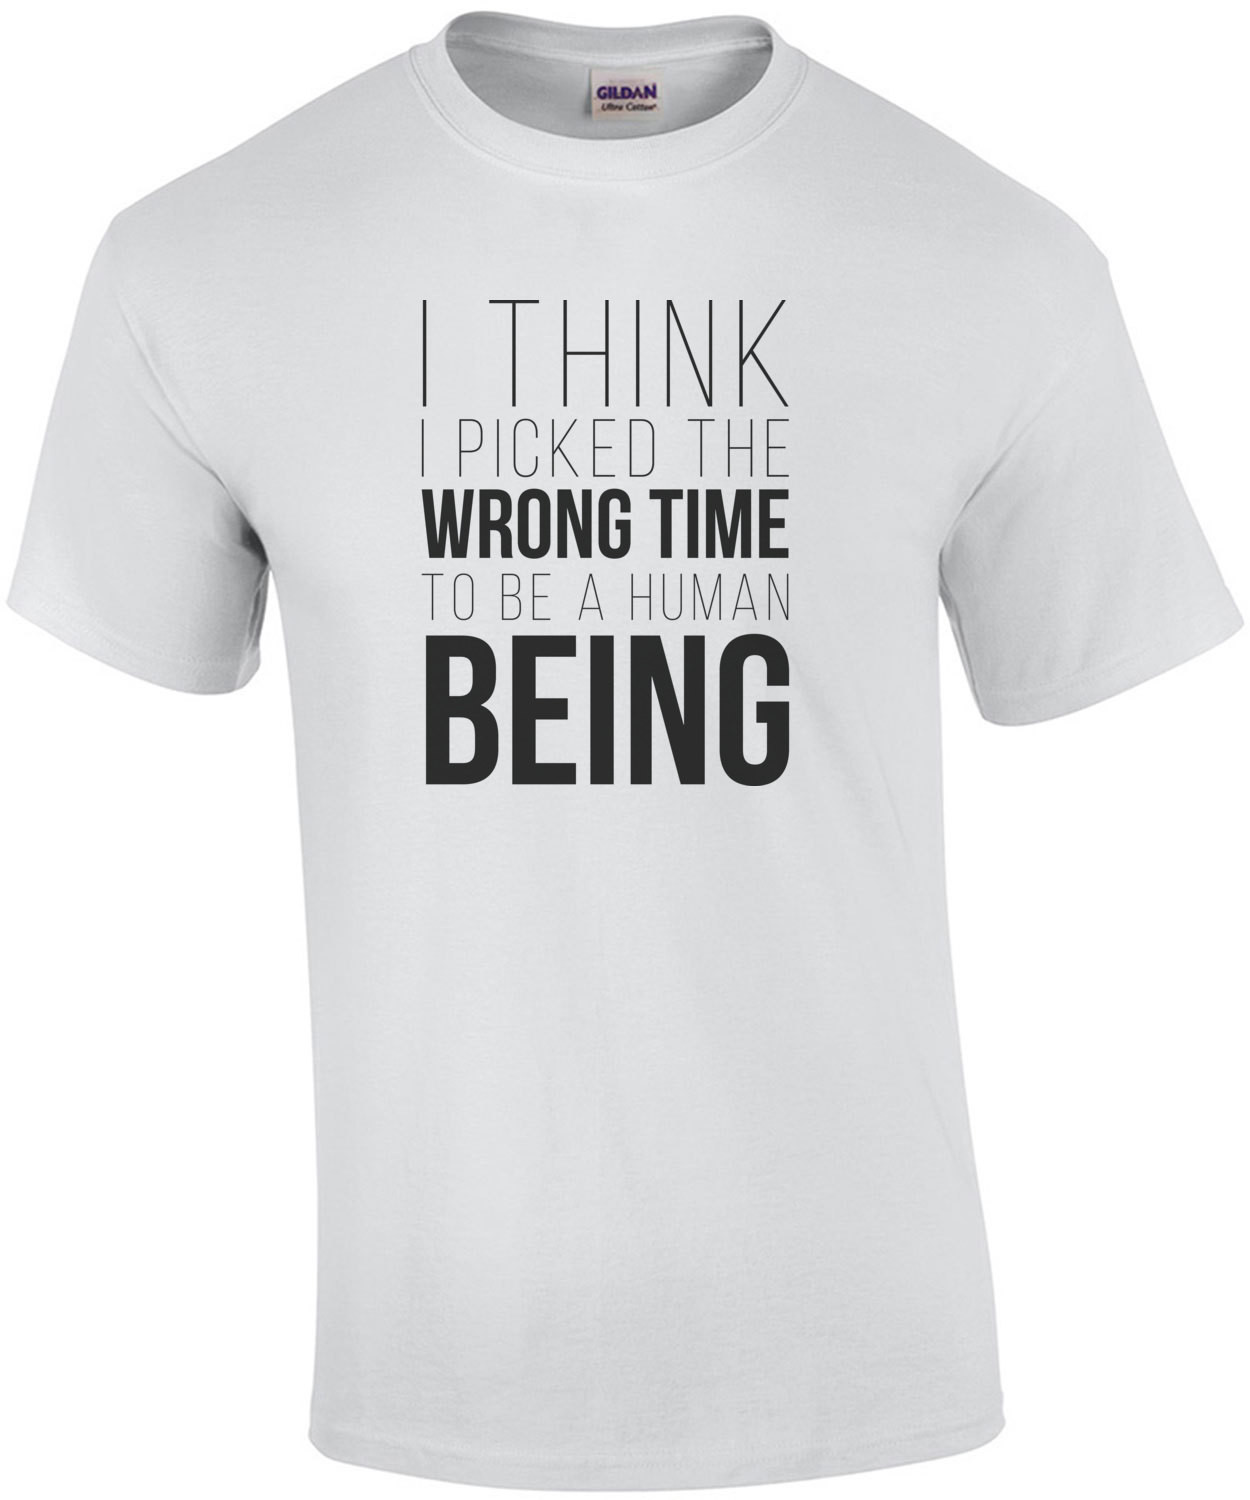 I think I picked the wrong time to be a human being - Heathers 80's T-Shirt